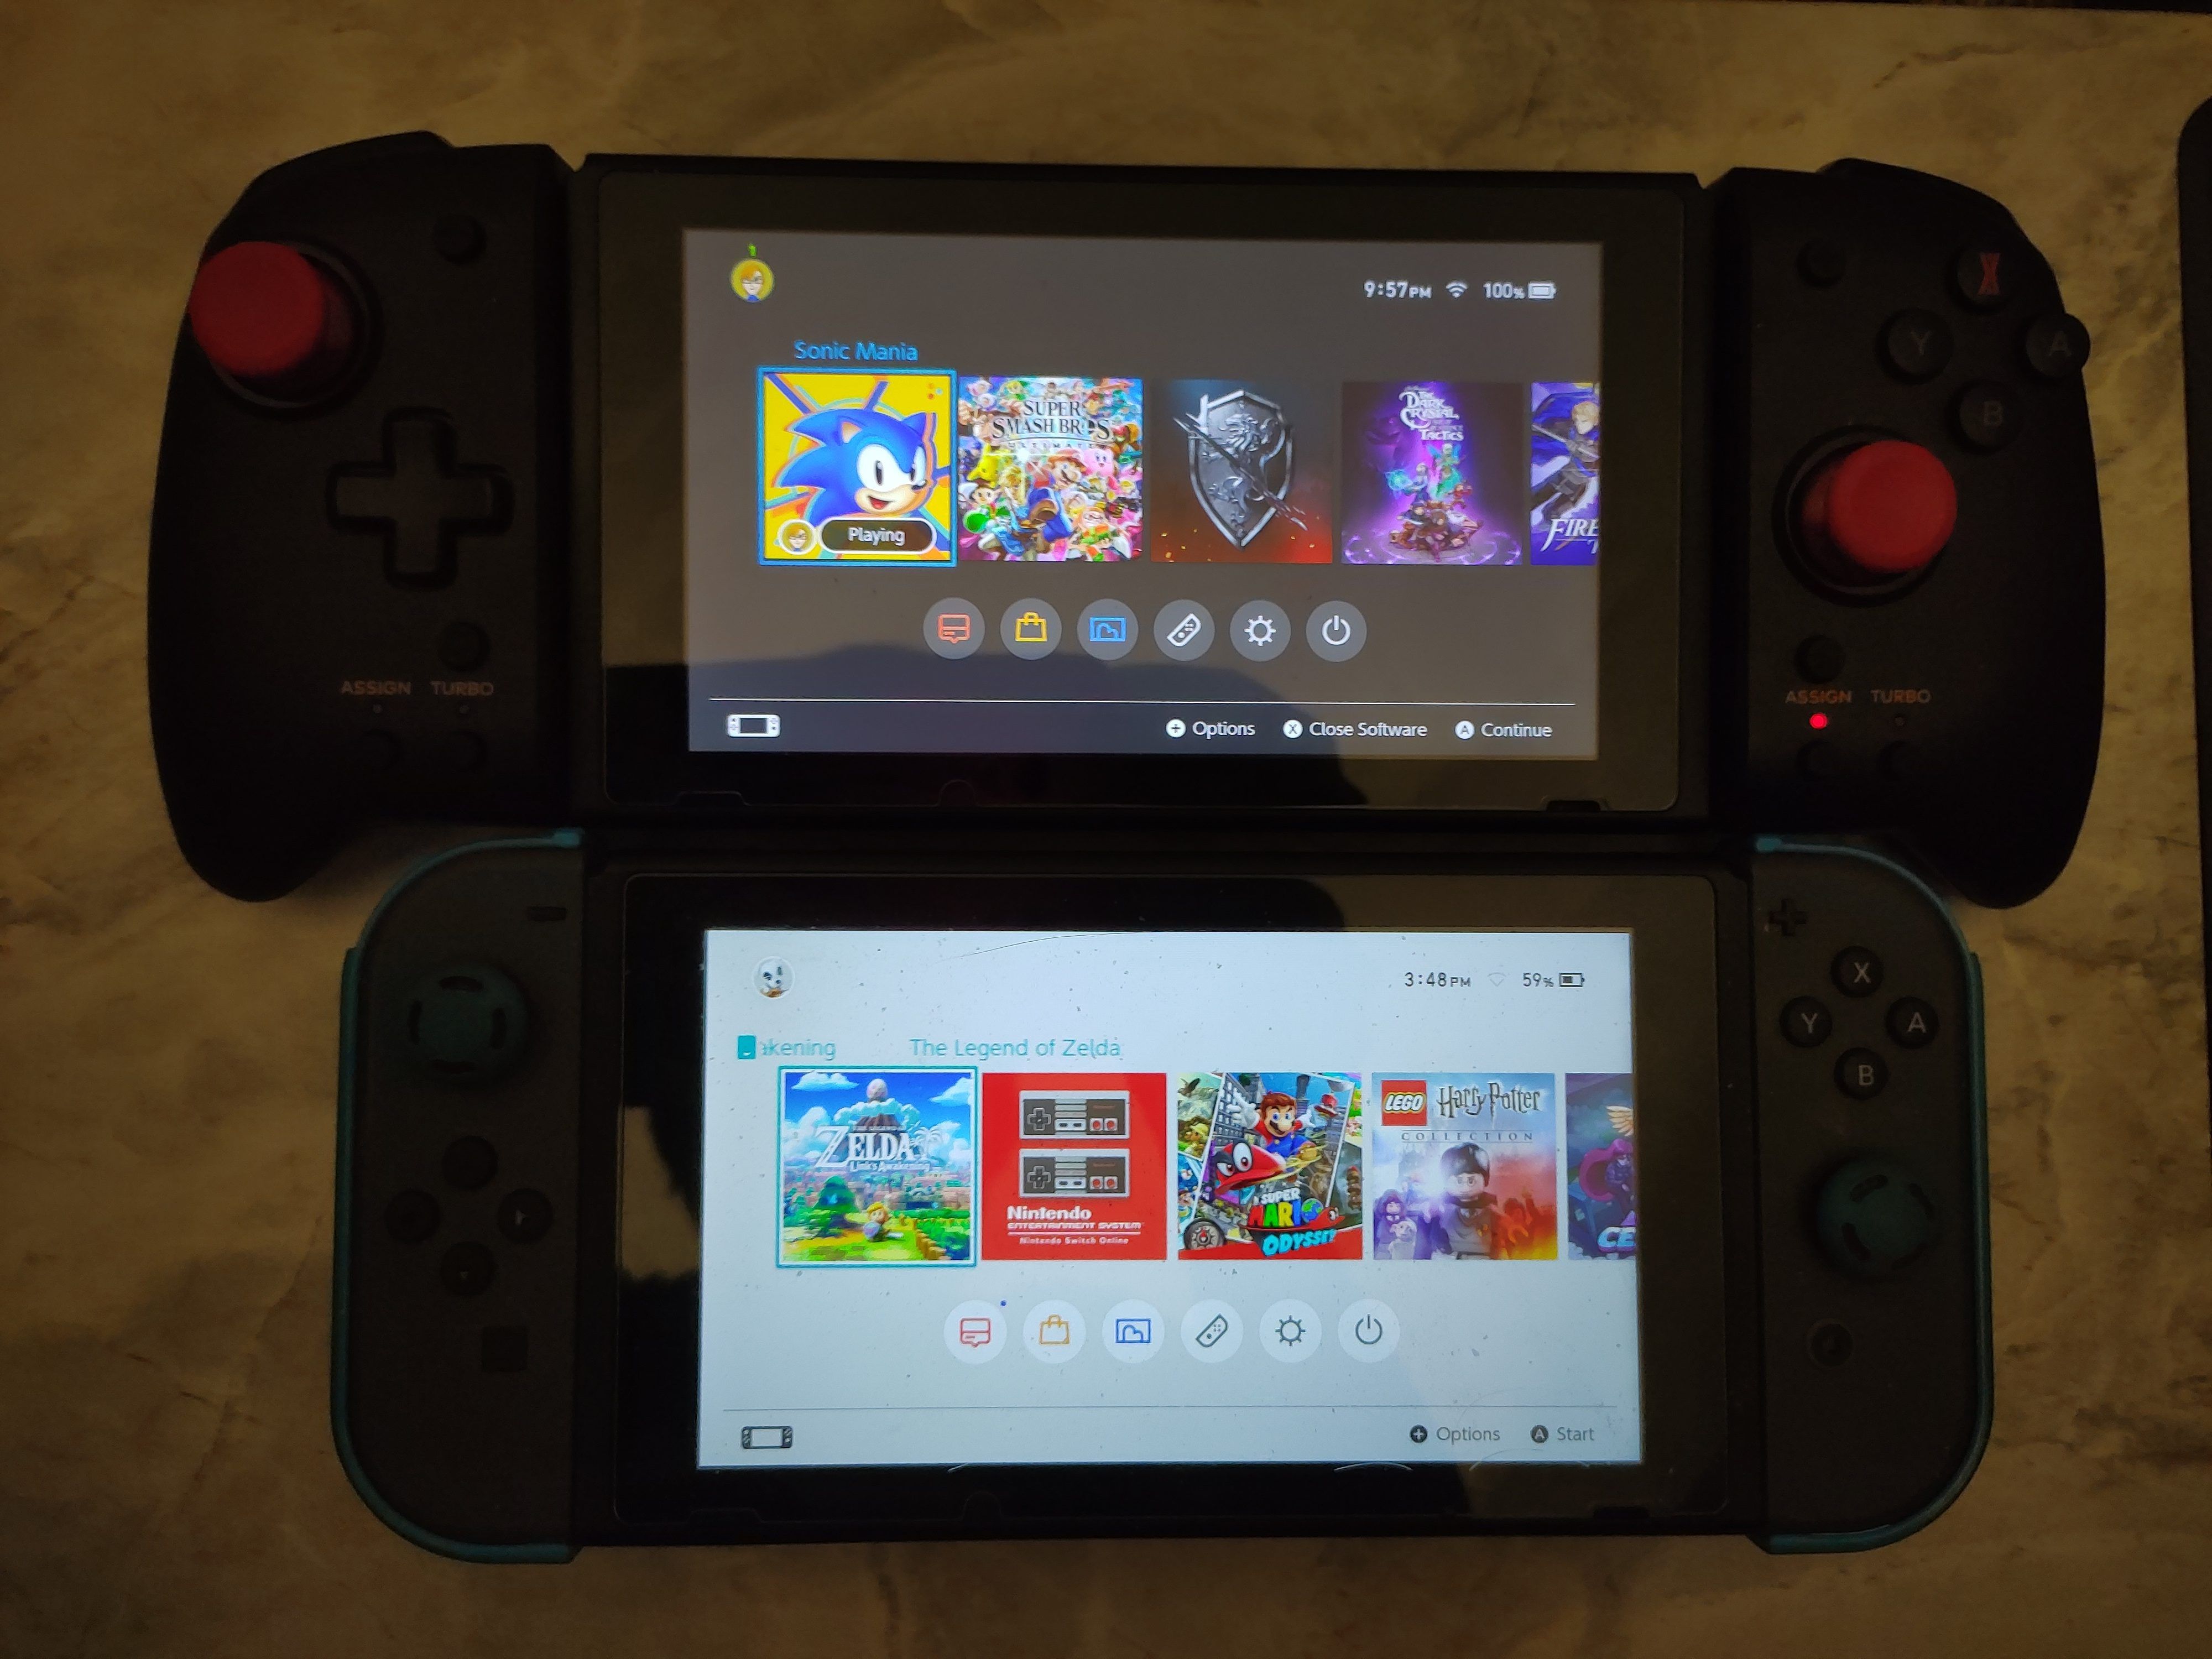 Hardware Review: Big Hands, Meet The Hori Split Pad Pro for Switch